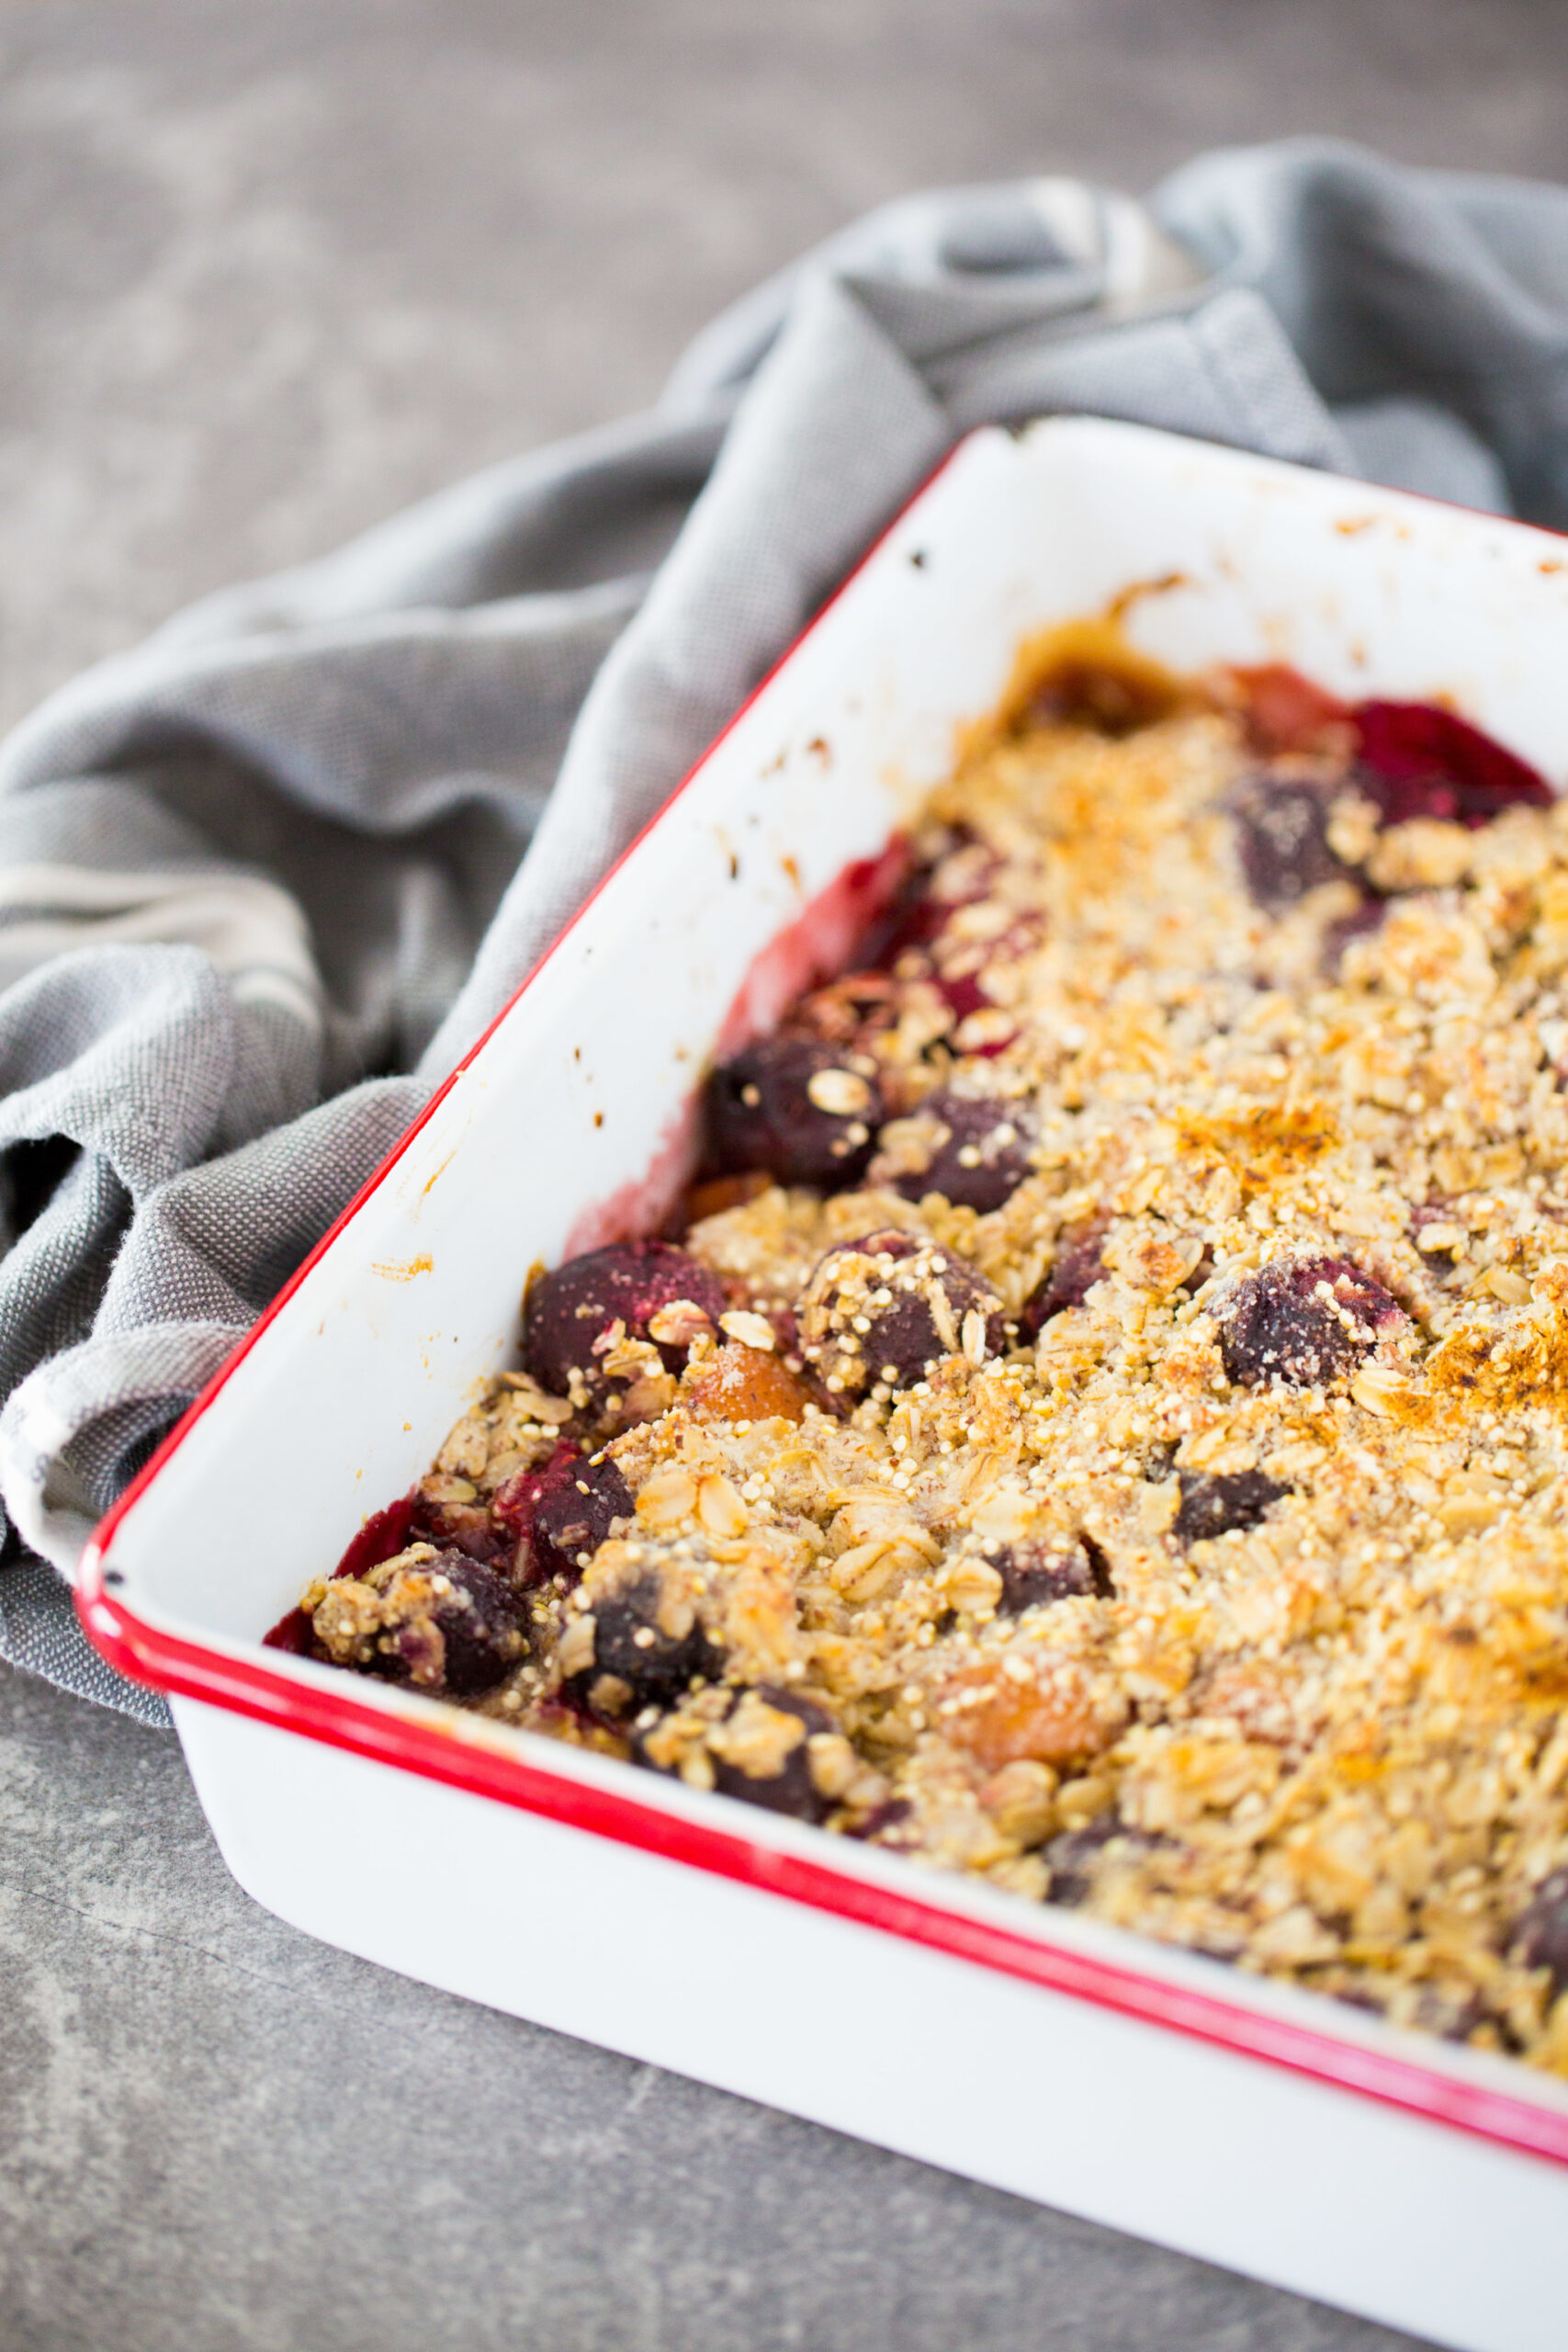 Cherry, raspberry and pear crumble recipe. Easy, vegan and full of flavor dessert.